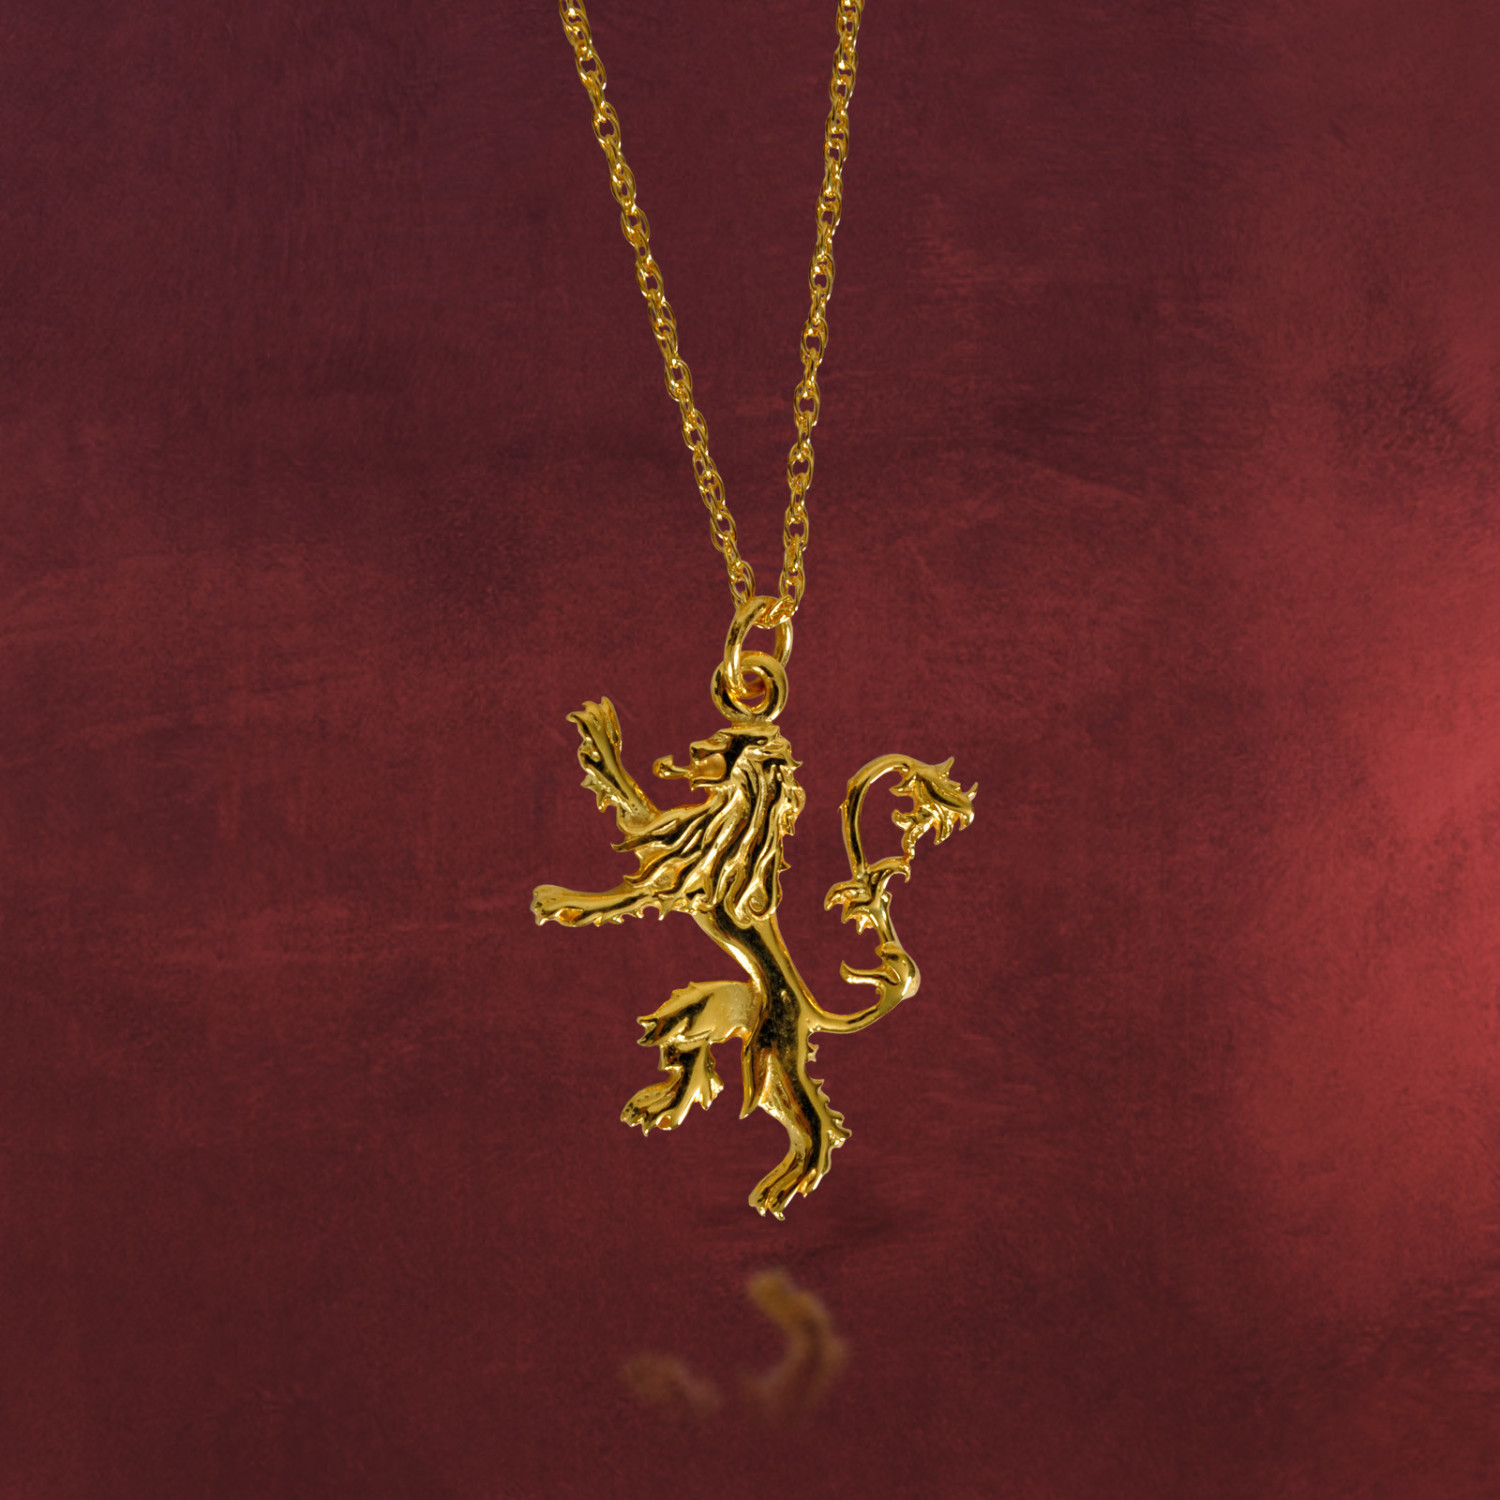 The Noble Collection Pendentif Lannister Game of Thrones